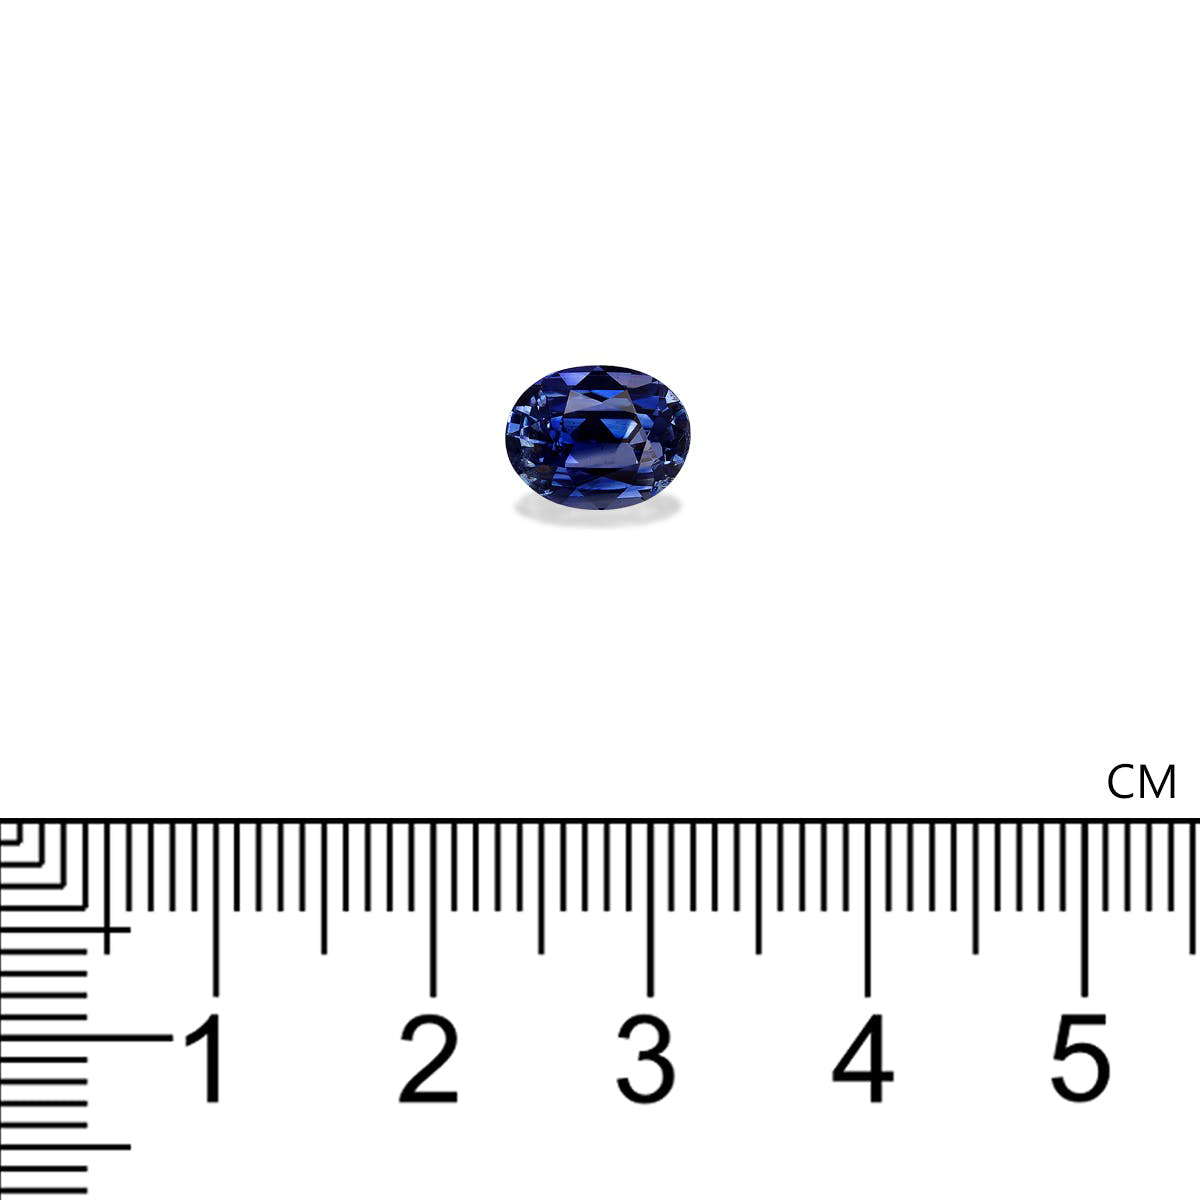 Picture of Blue Sapphire Unheated Sri Lanka 3.14ct - 8x6mm (BS0260)